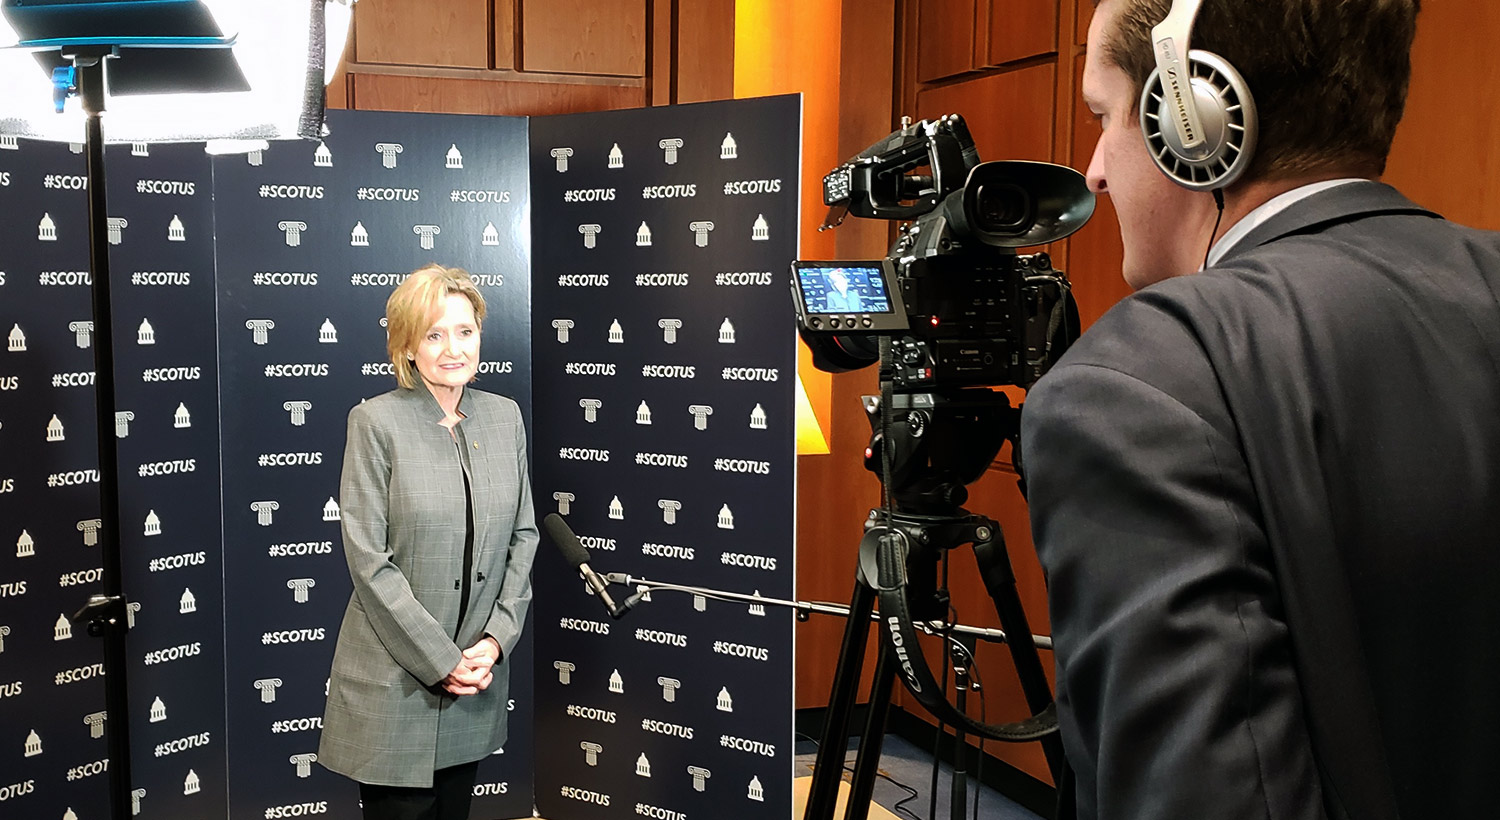 Senator Hyde-Smith discusses the Supreme Court nomination of Brett Kavanaugh with local media outlets